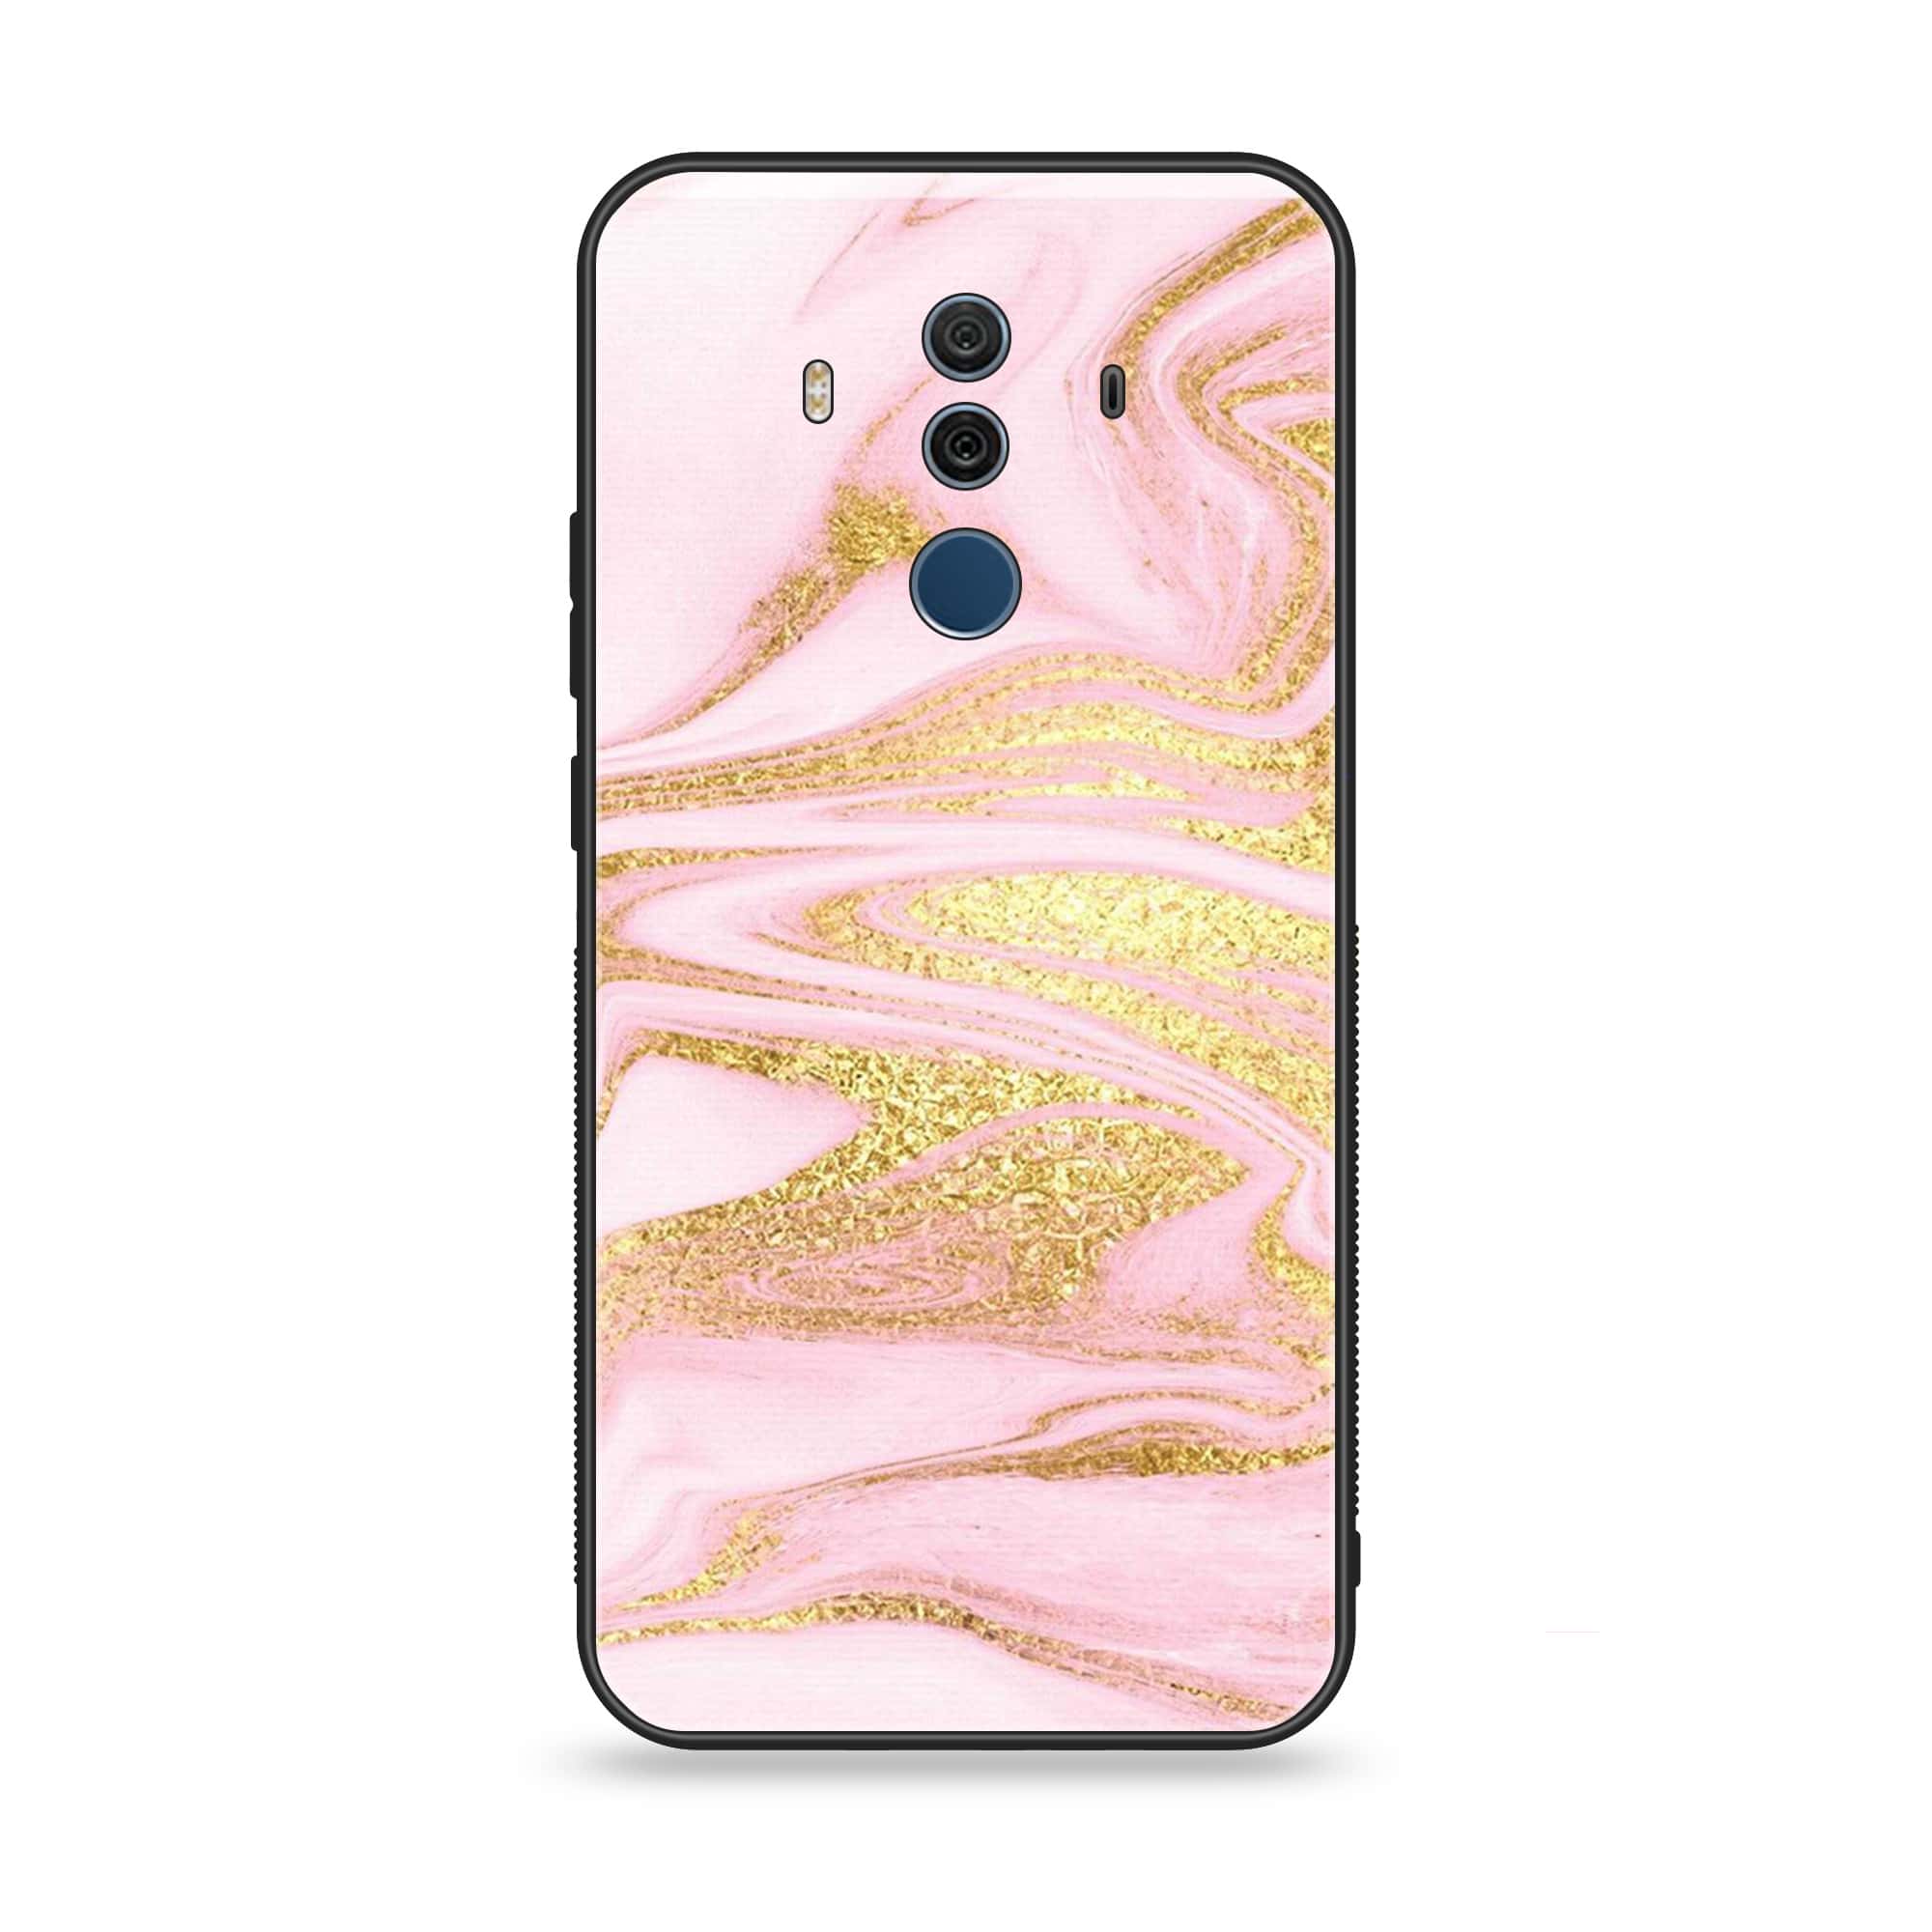 Huawei Mate 10 Pro - Pink Marble Series - Premium Printed Glass soft Bumper shock Proof Case